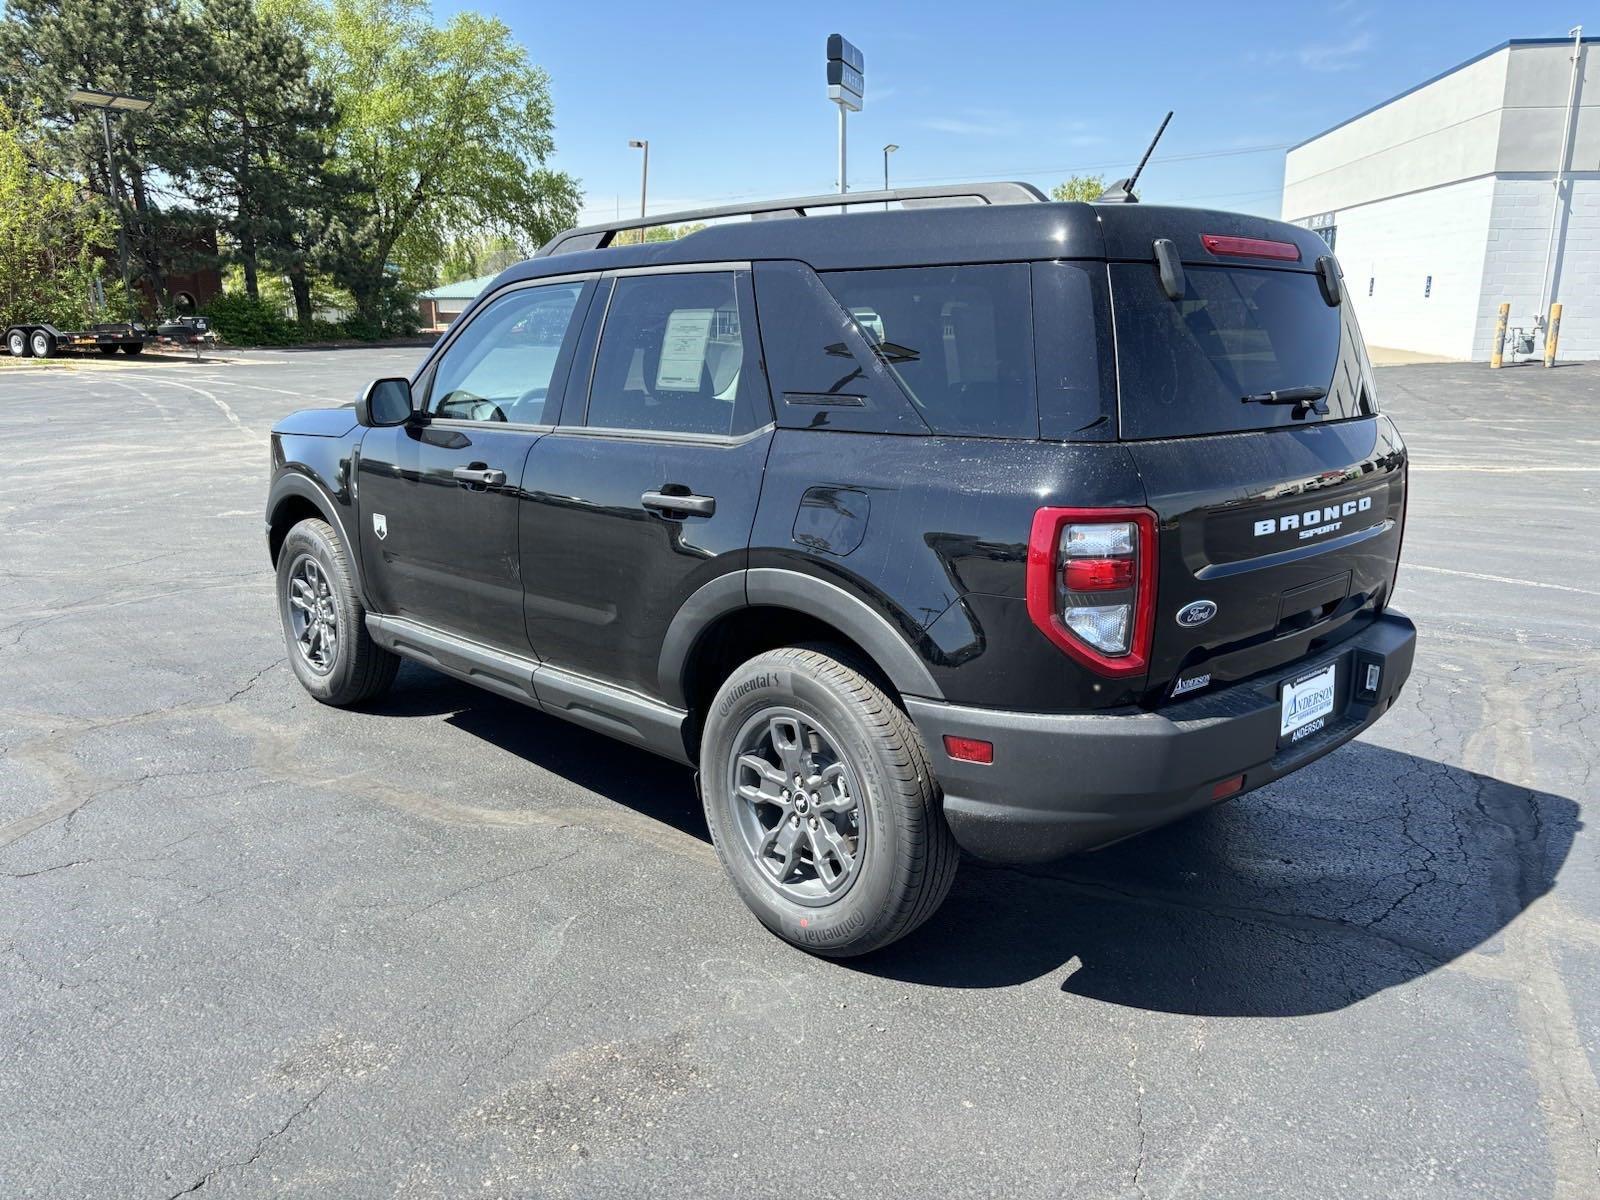 New 2024 Ford Bronco Sport Big Bend SUV for sale in St Joseph MO